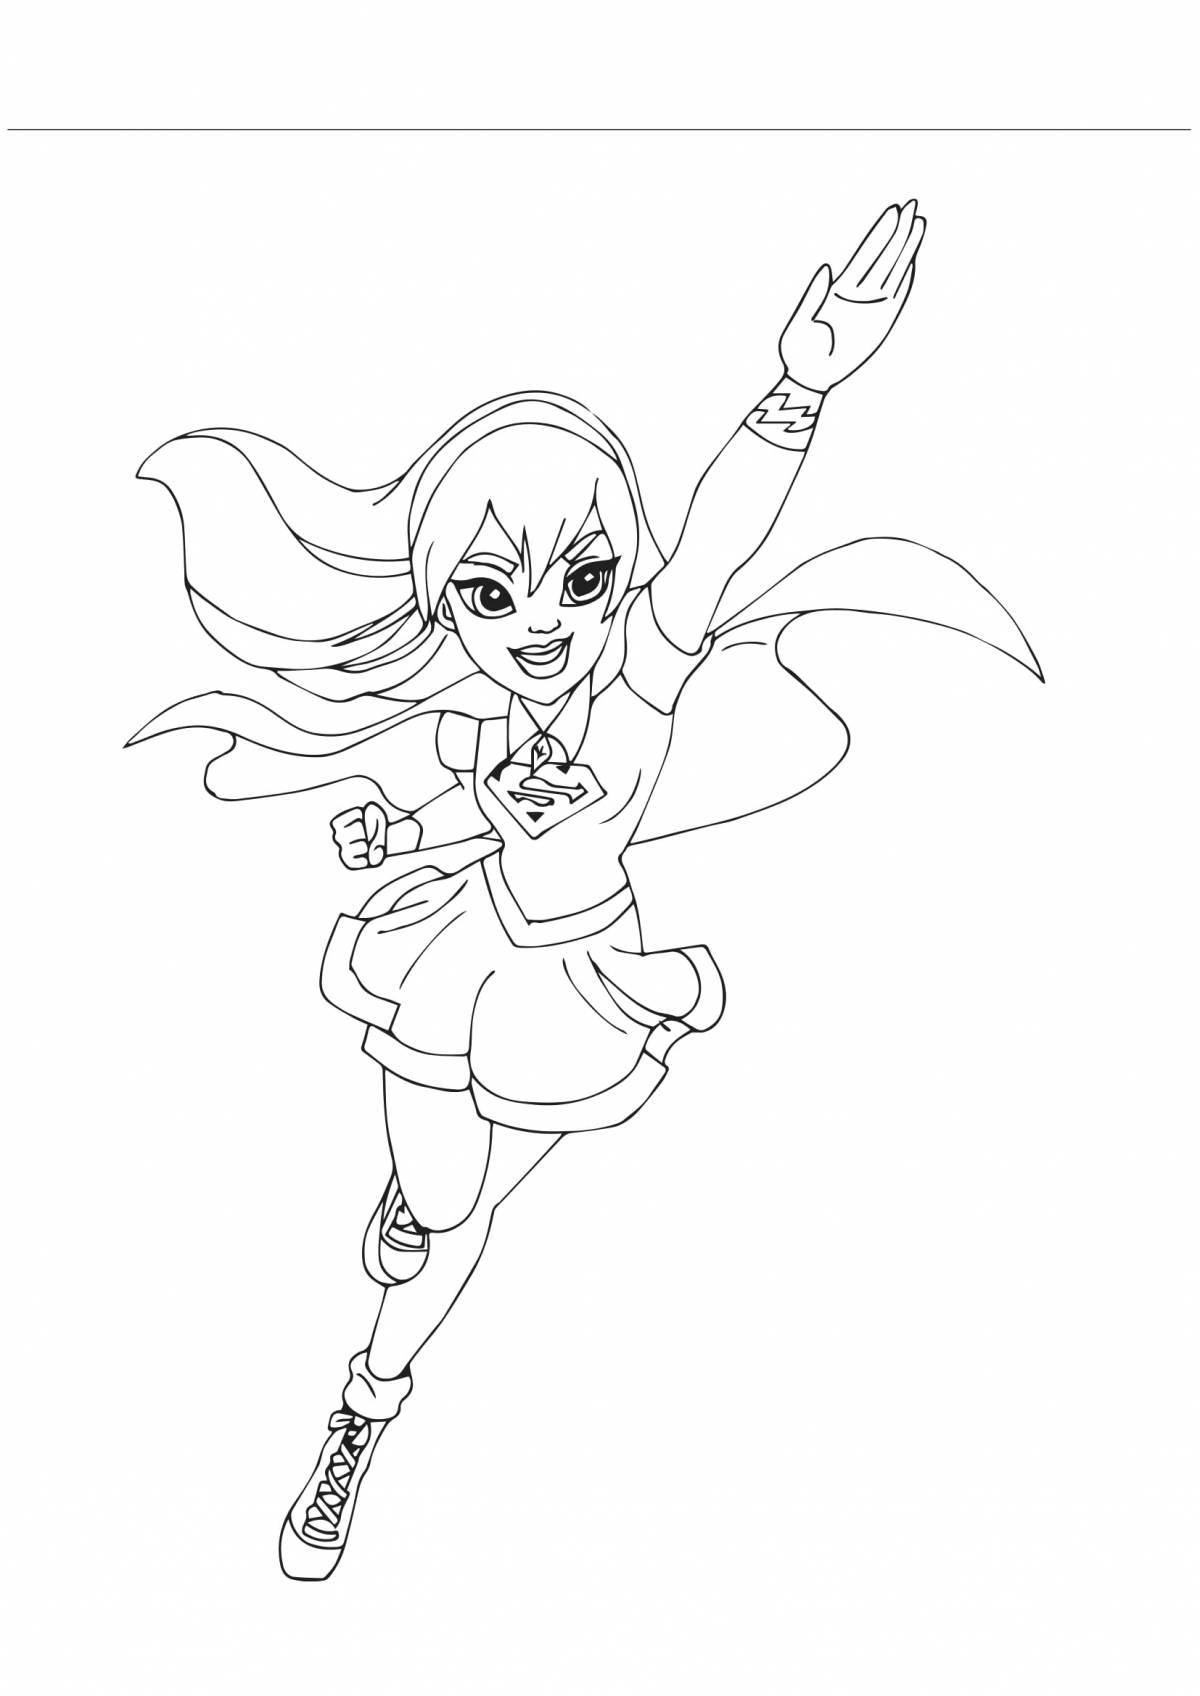 Super hero high animated coloring page